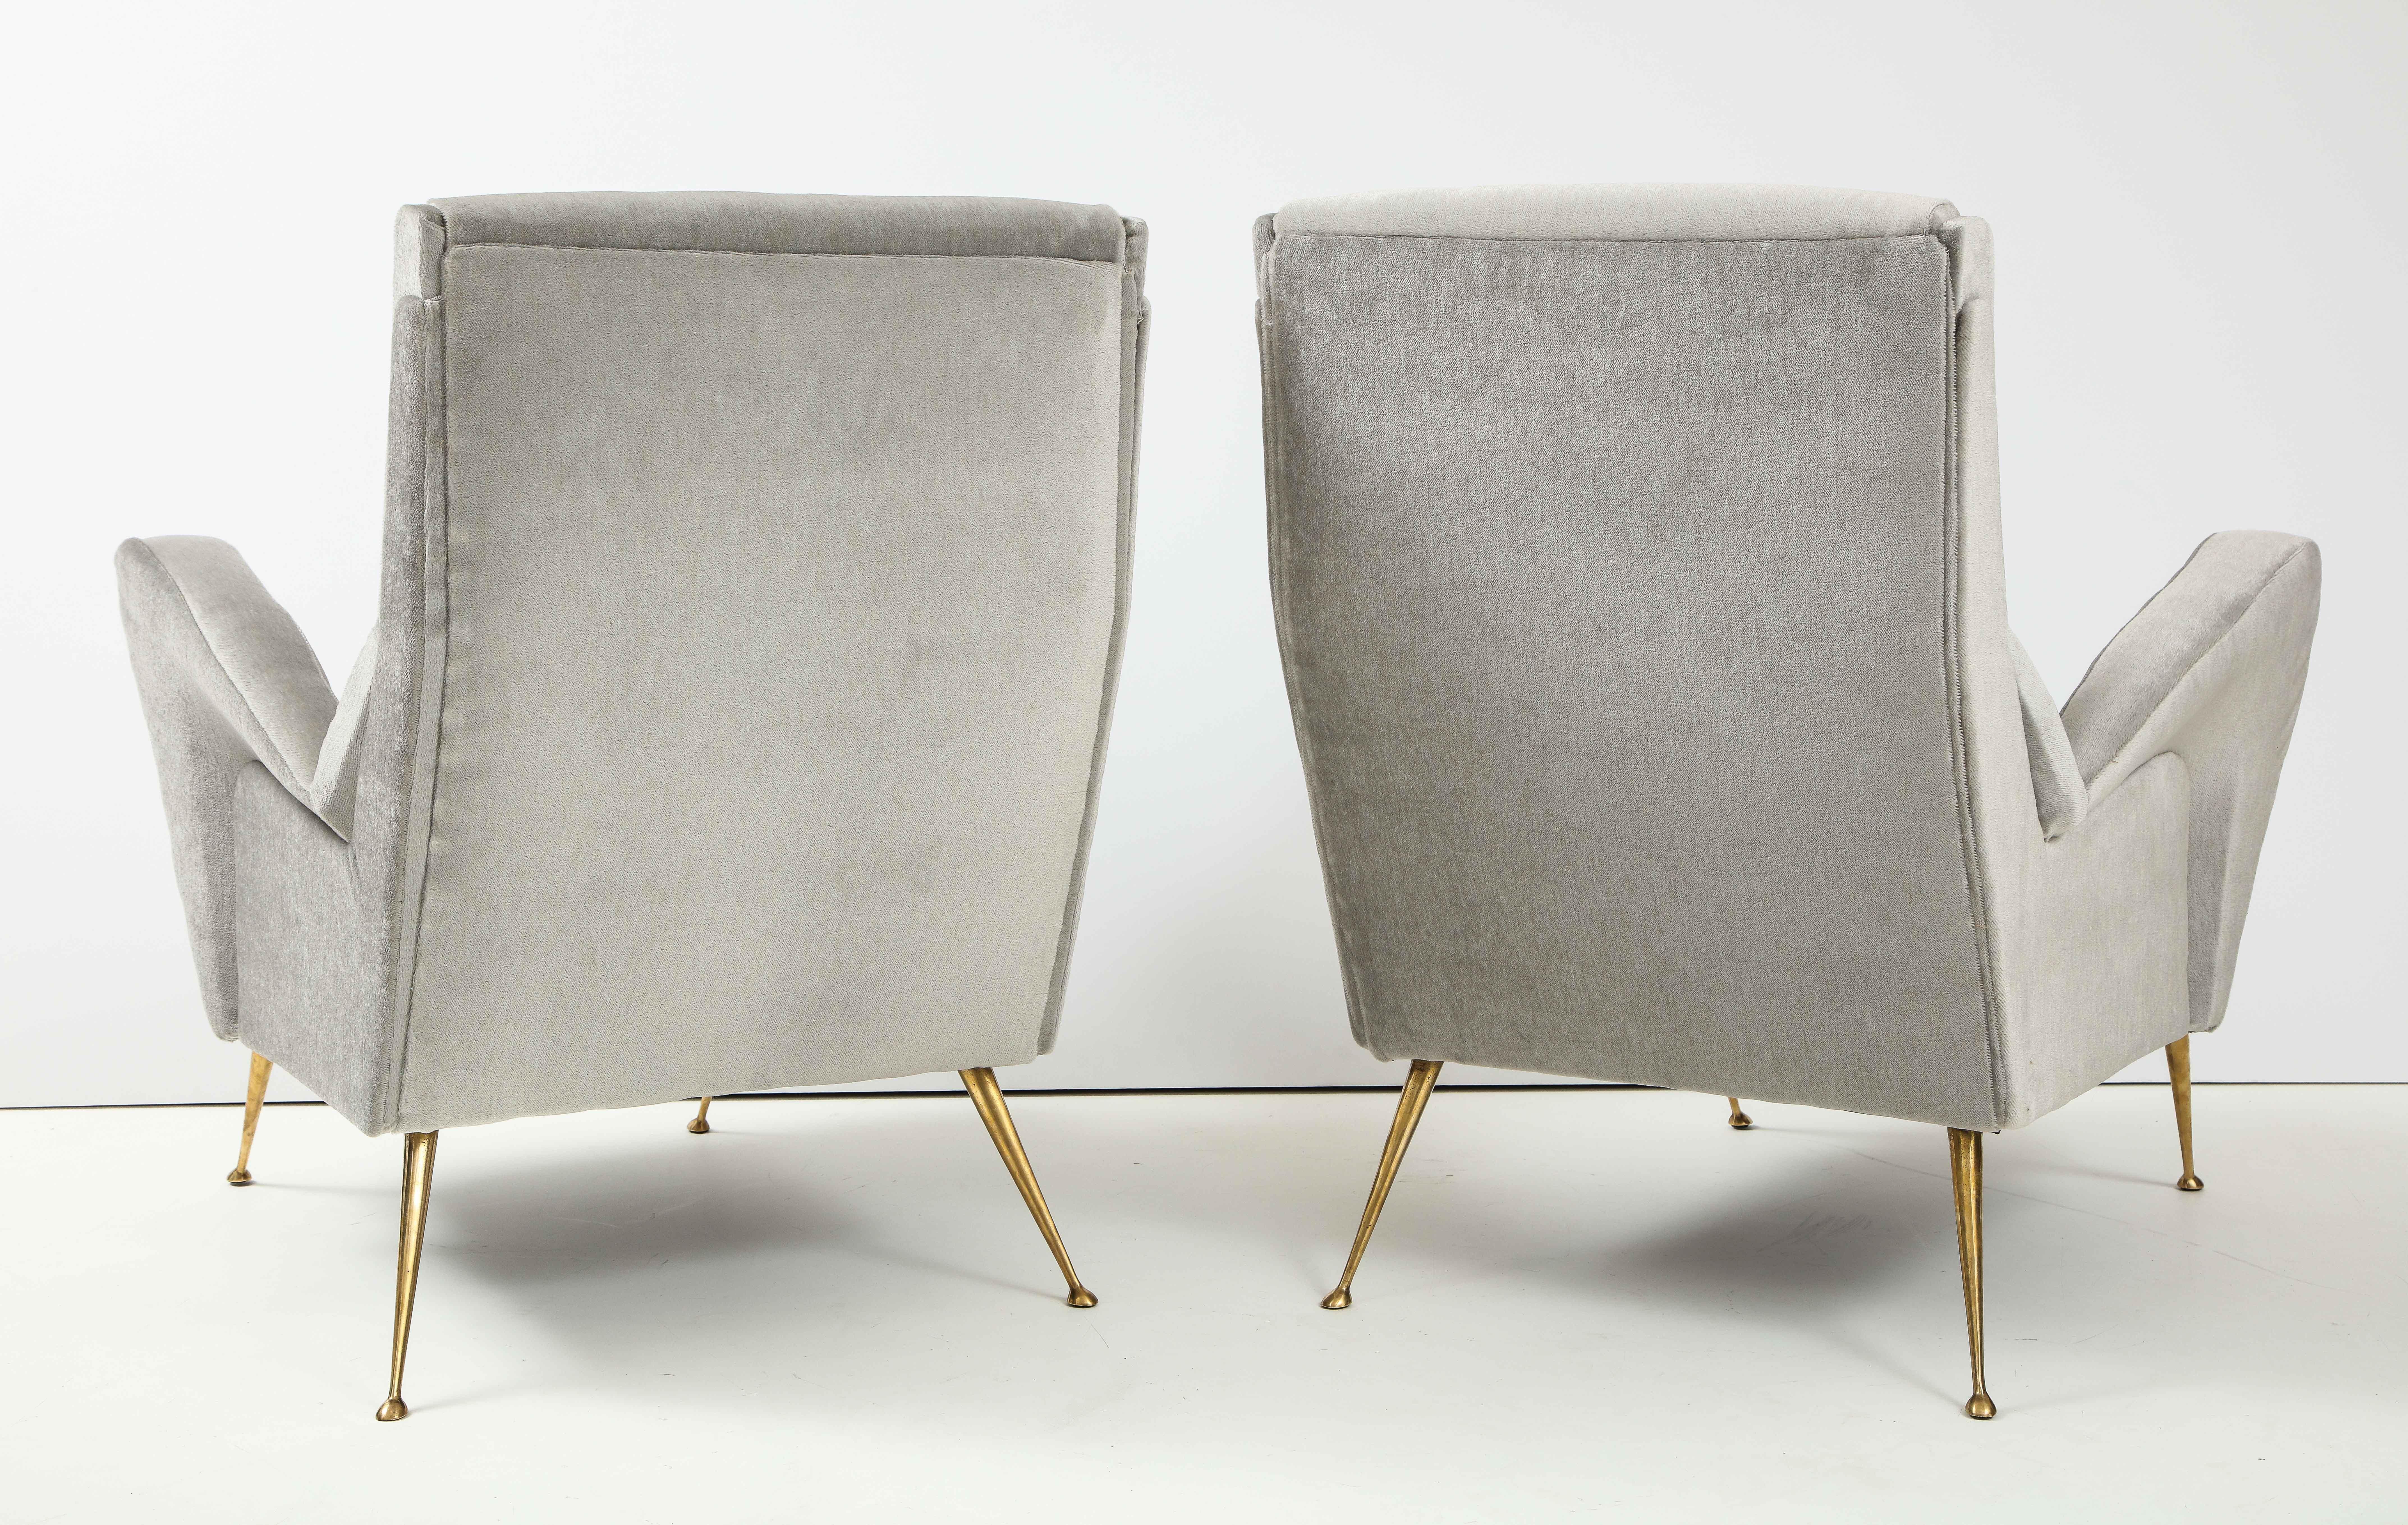 1950's Modernist Sculptural Italian Lounge Chairs with Solid Brass Legs 5